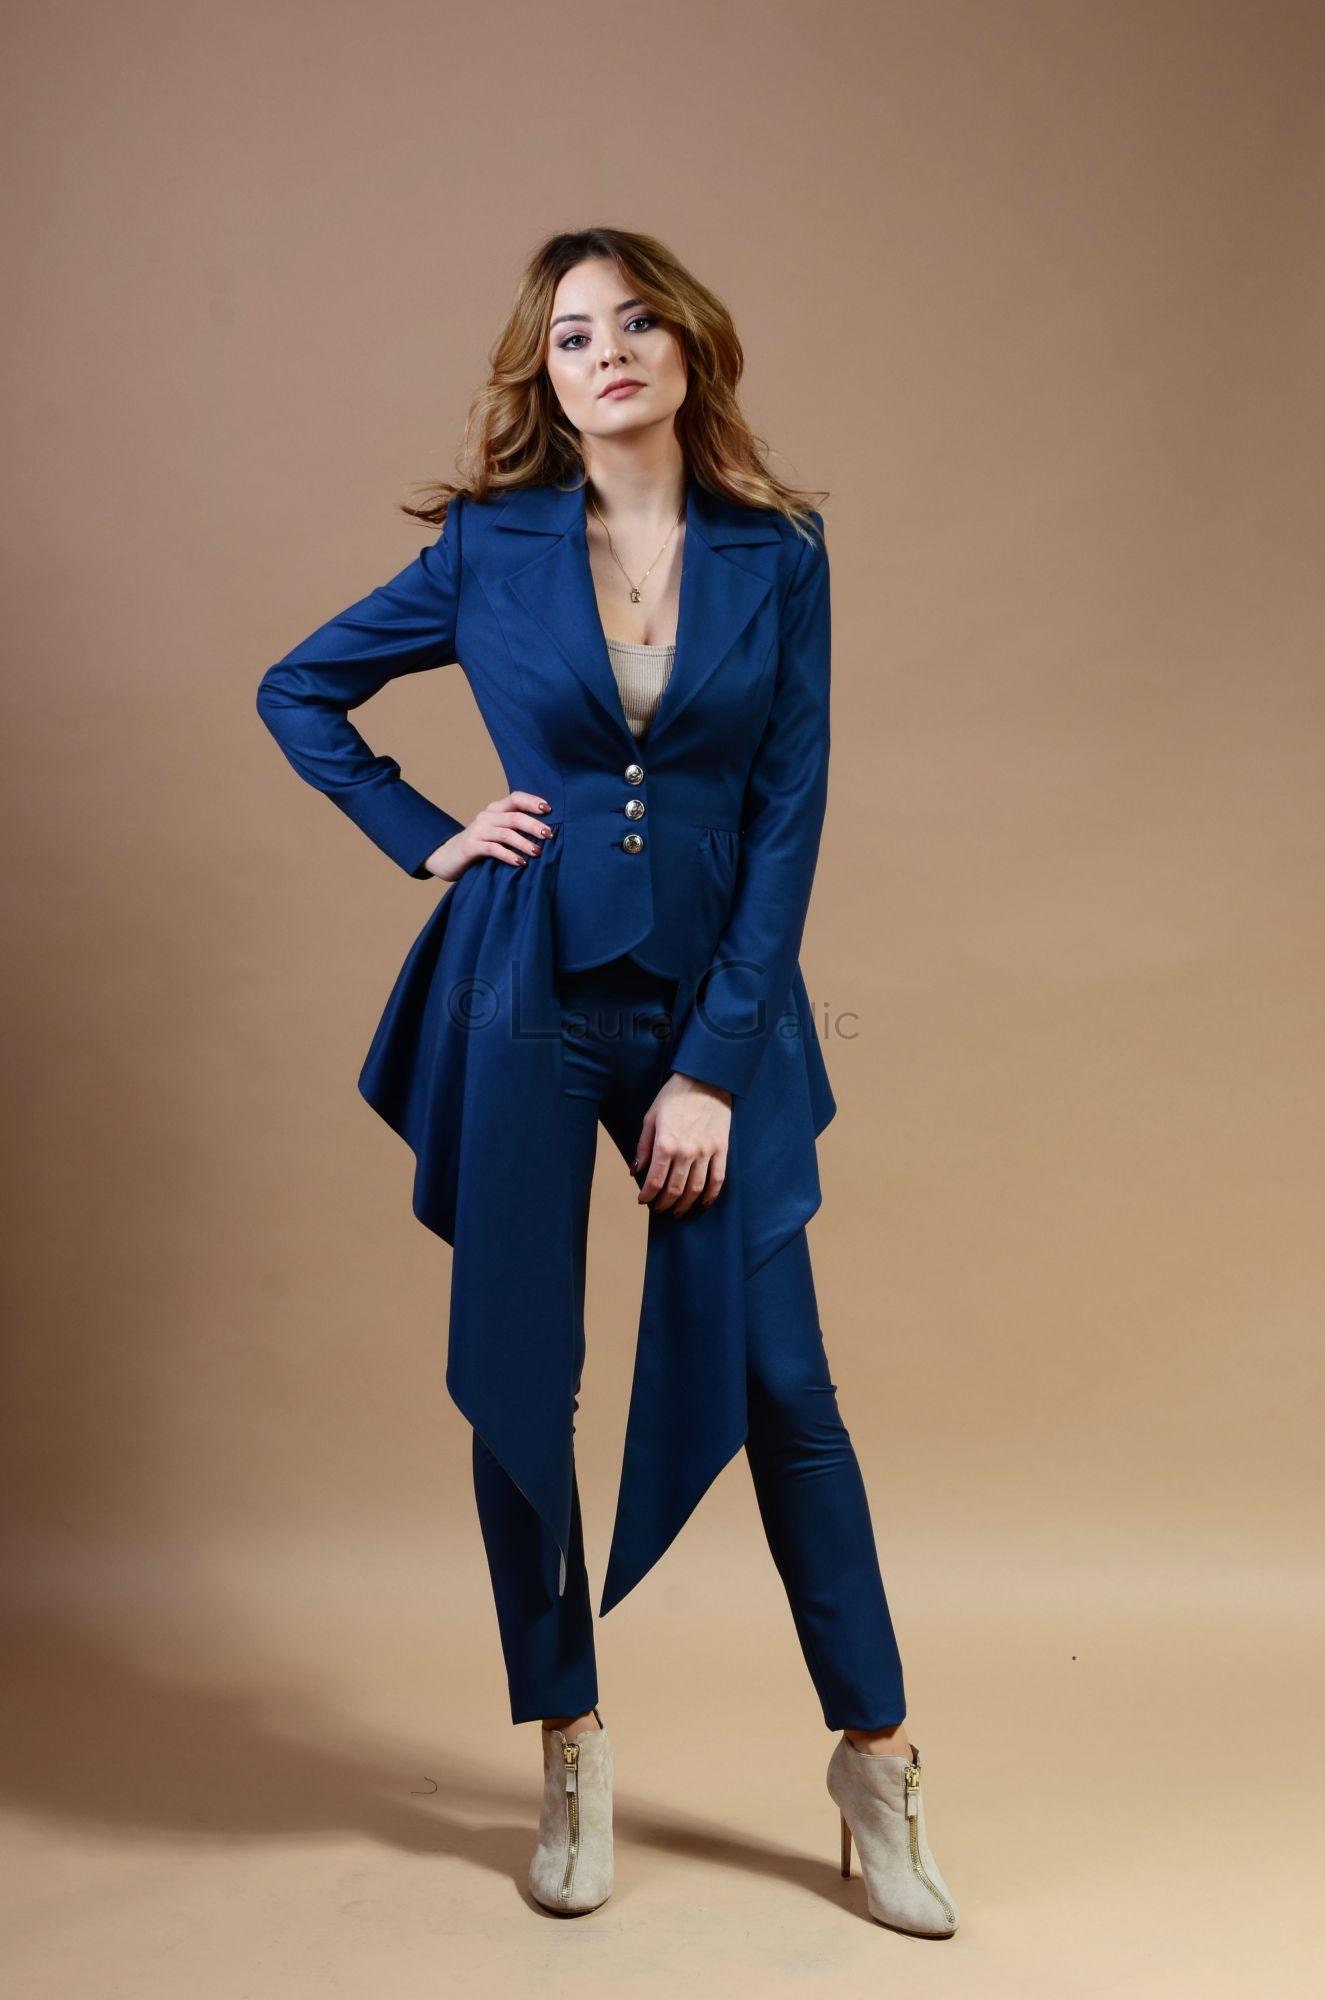 Blue Suit for Women, Jacket and Tight Pants Suit, Tapered Trousers